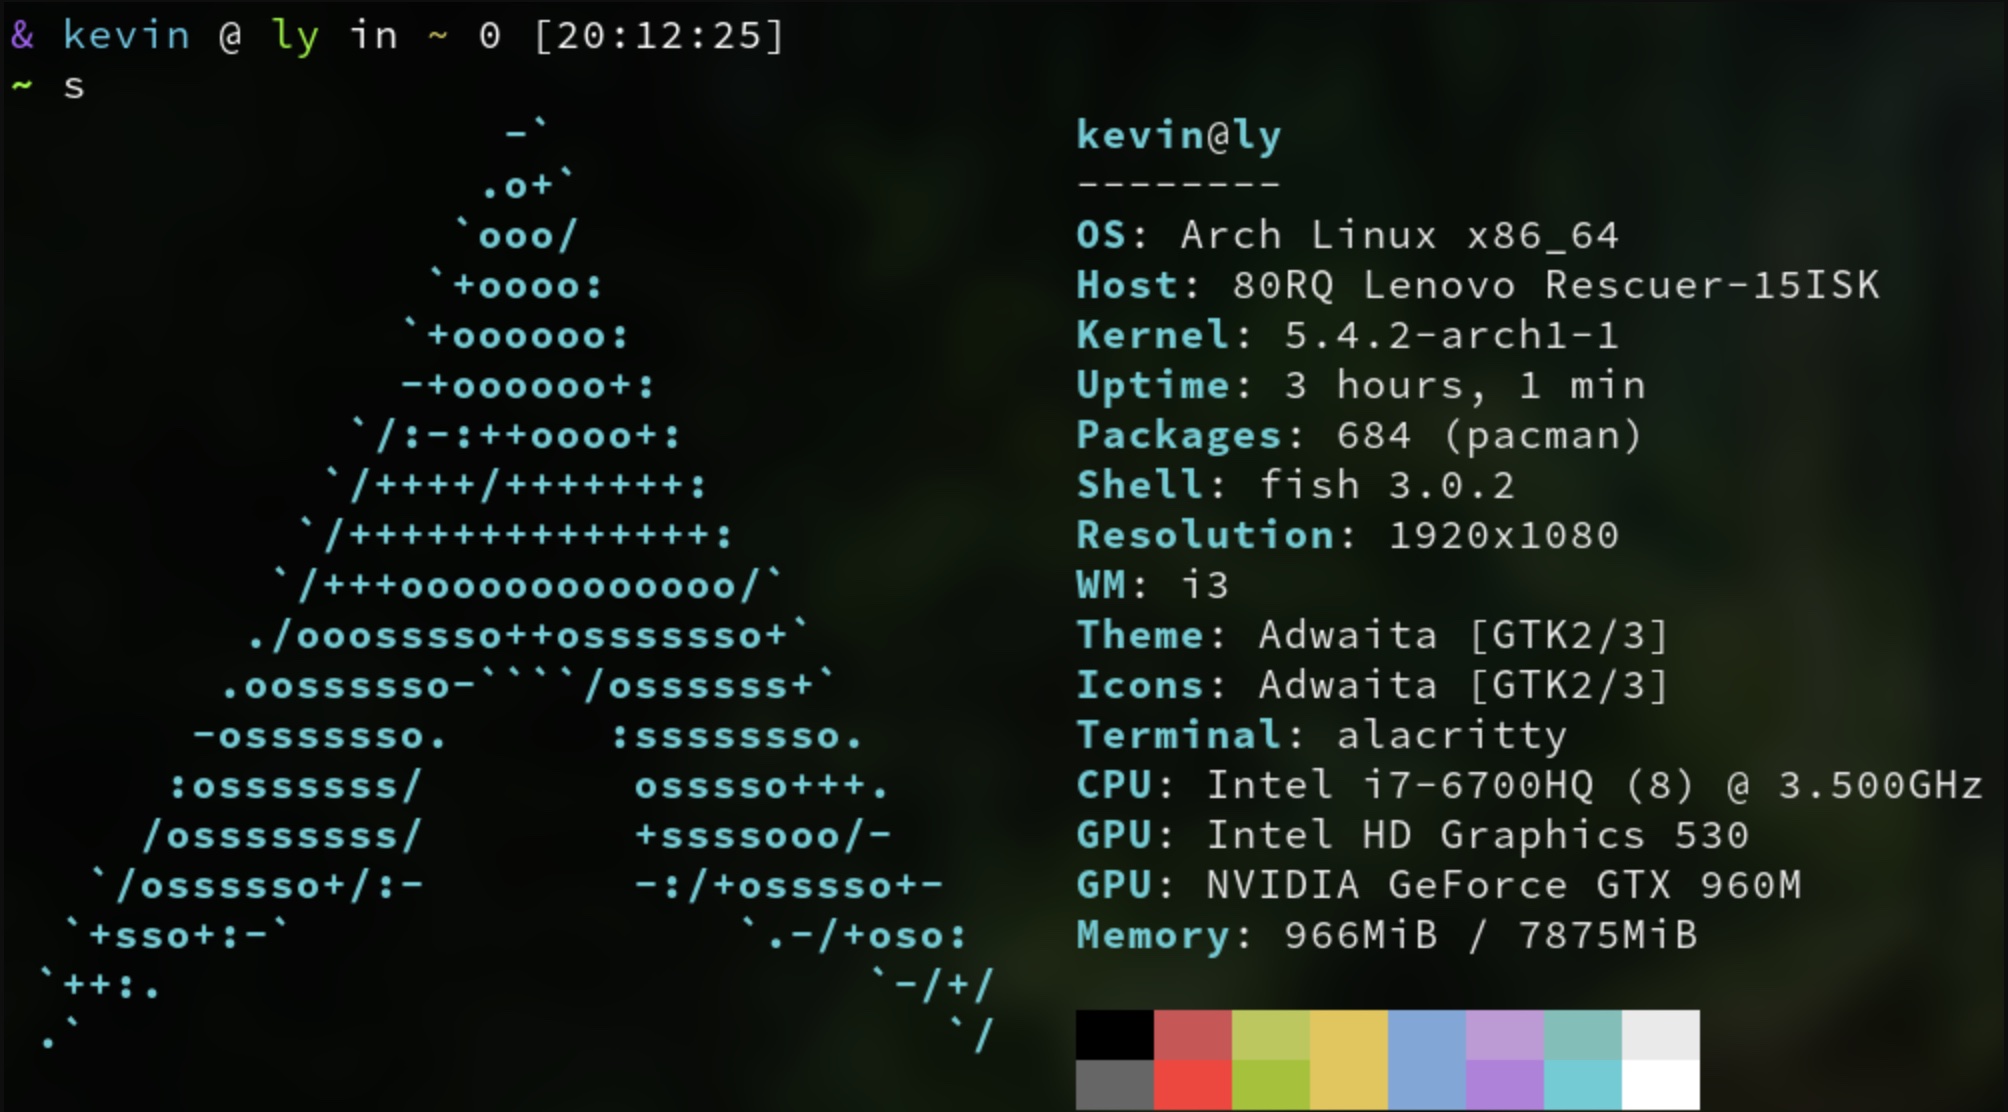 arch linux not upgrade kernel